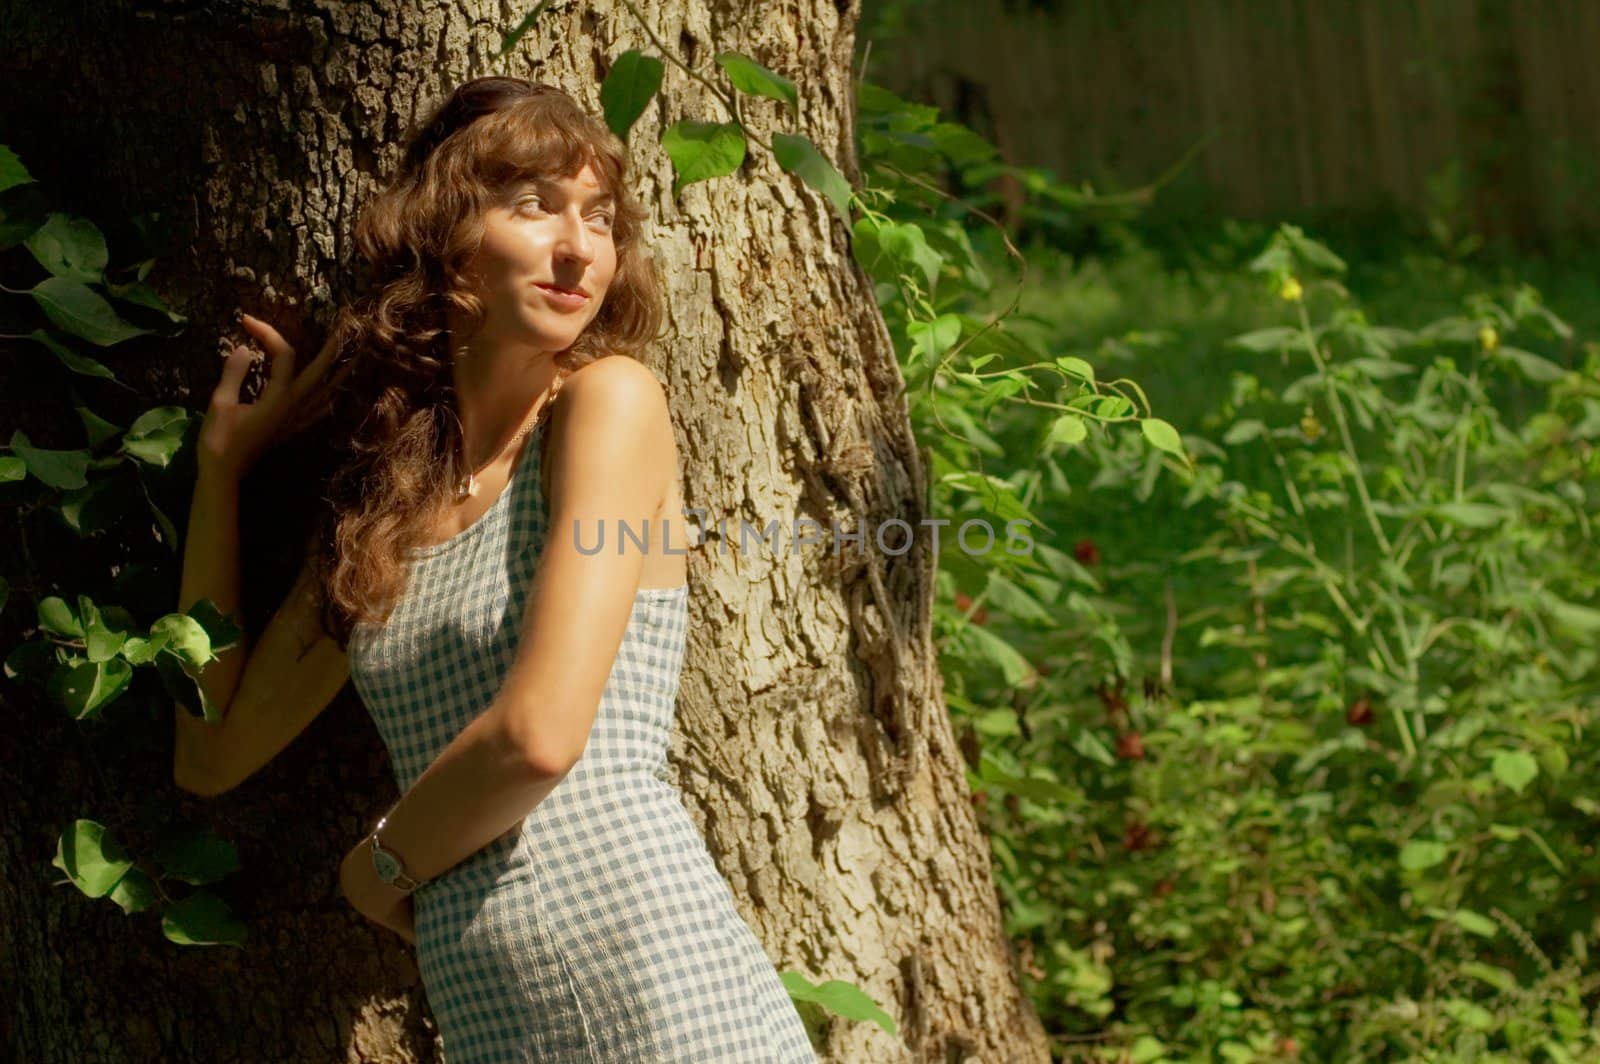 Sexy girl against tree trunk in woods.